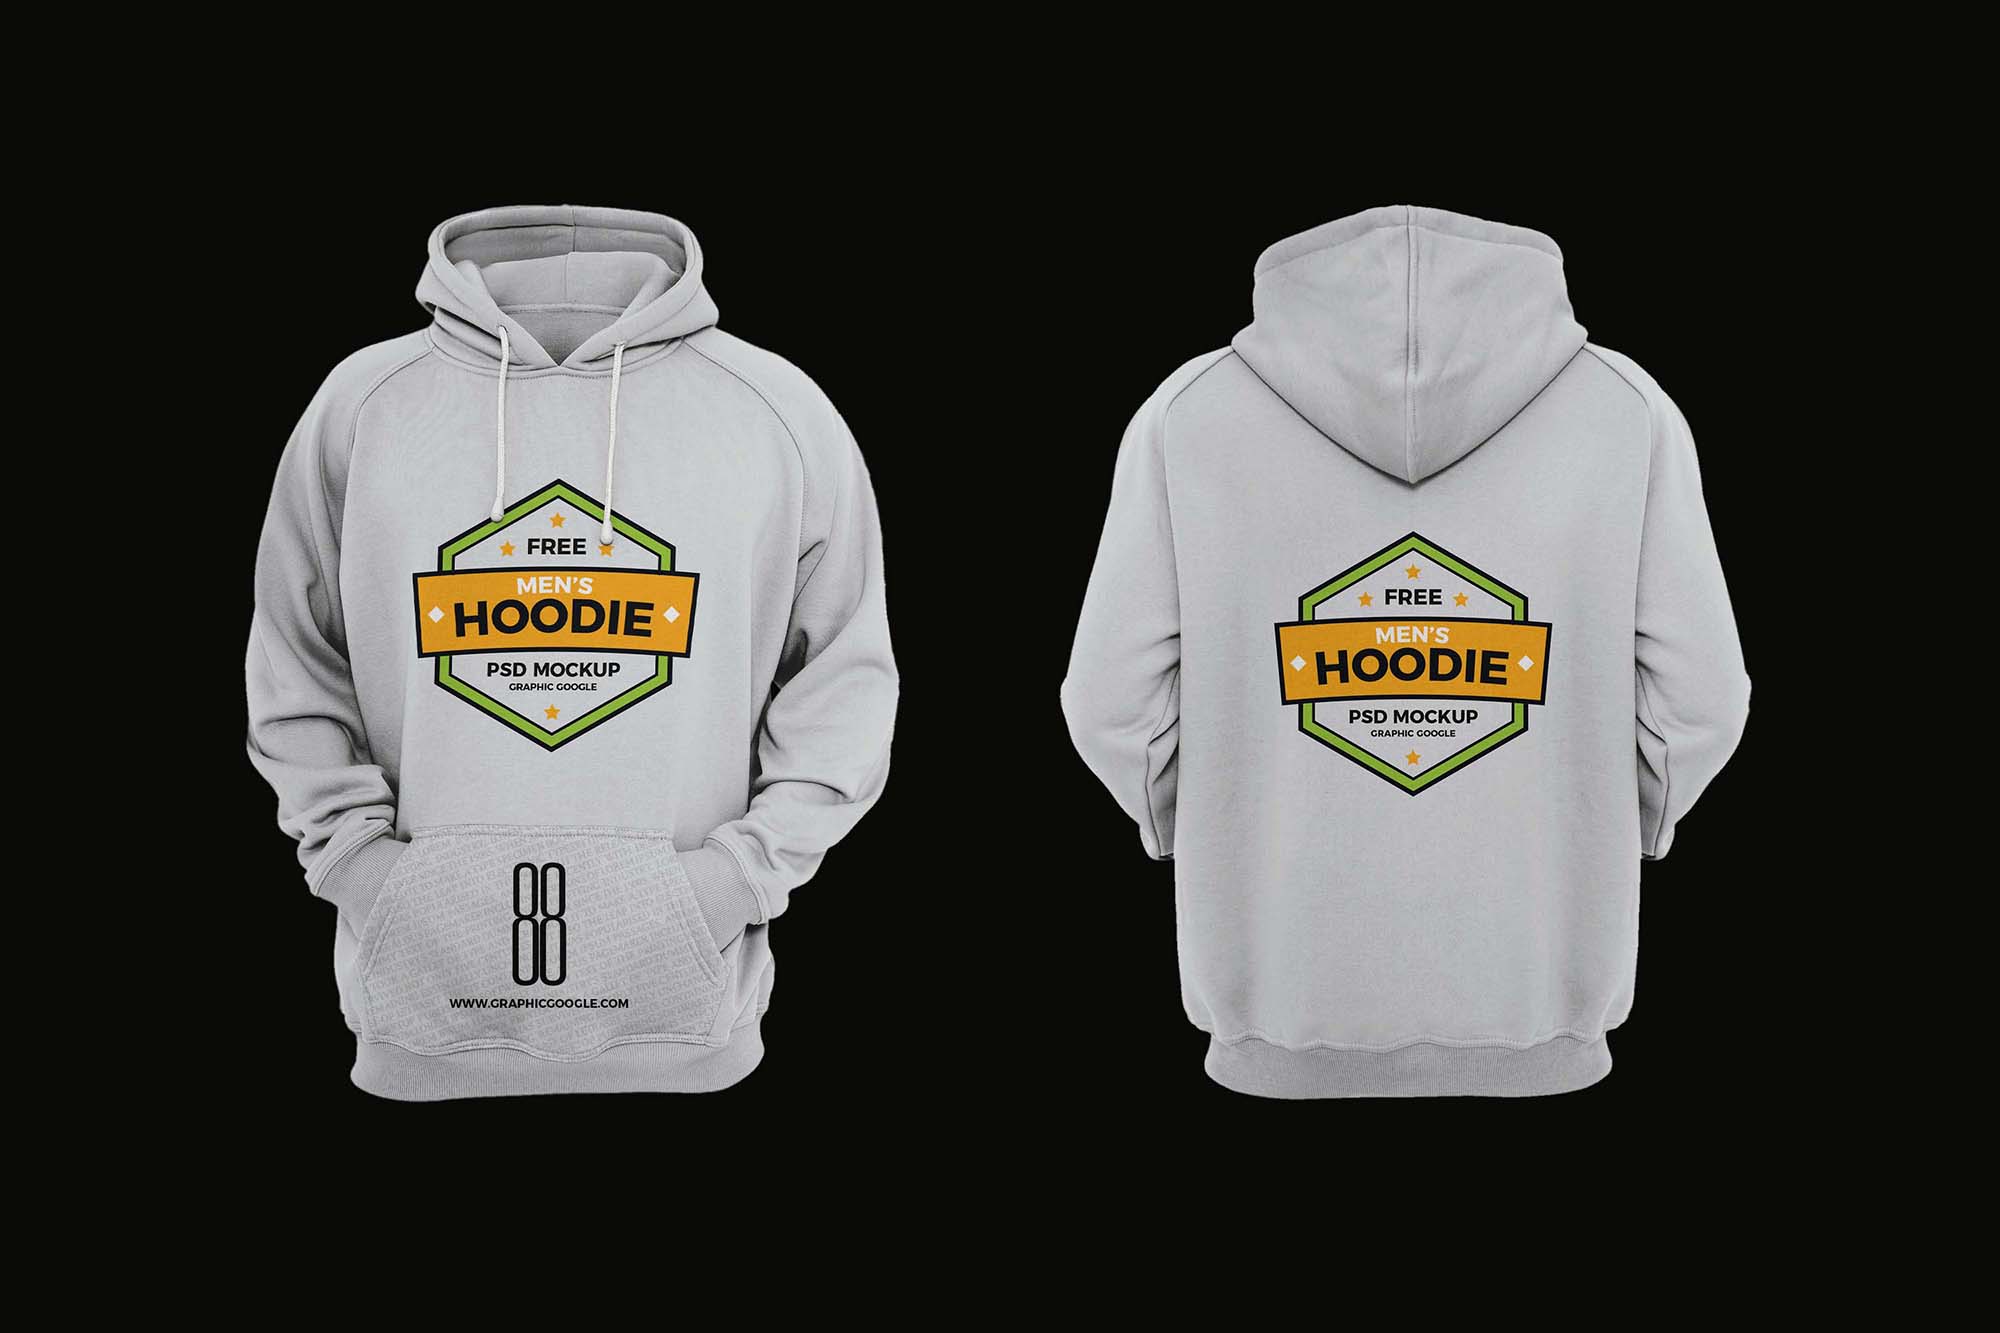 Download Hoodie for Men PSD Mockup (Free) by Graphic Google